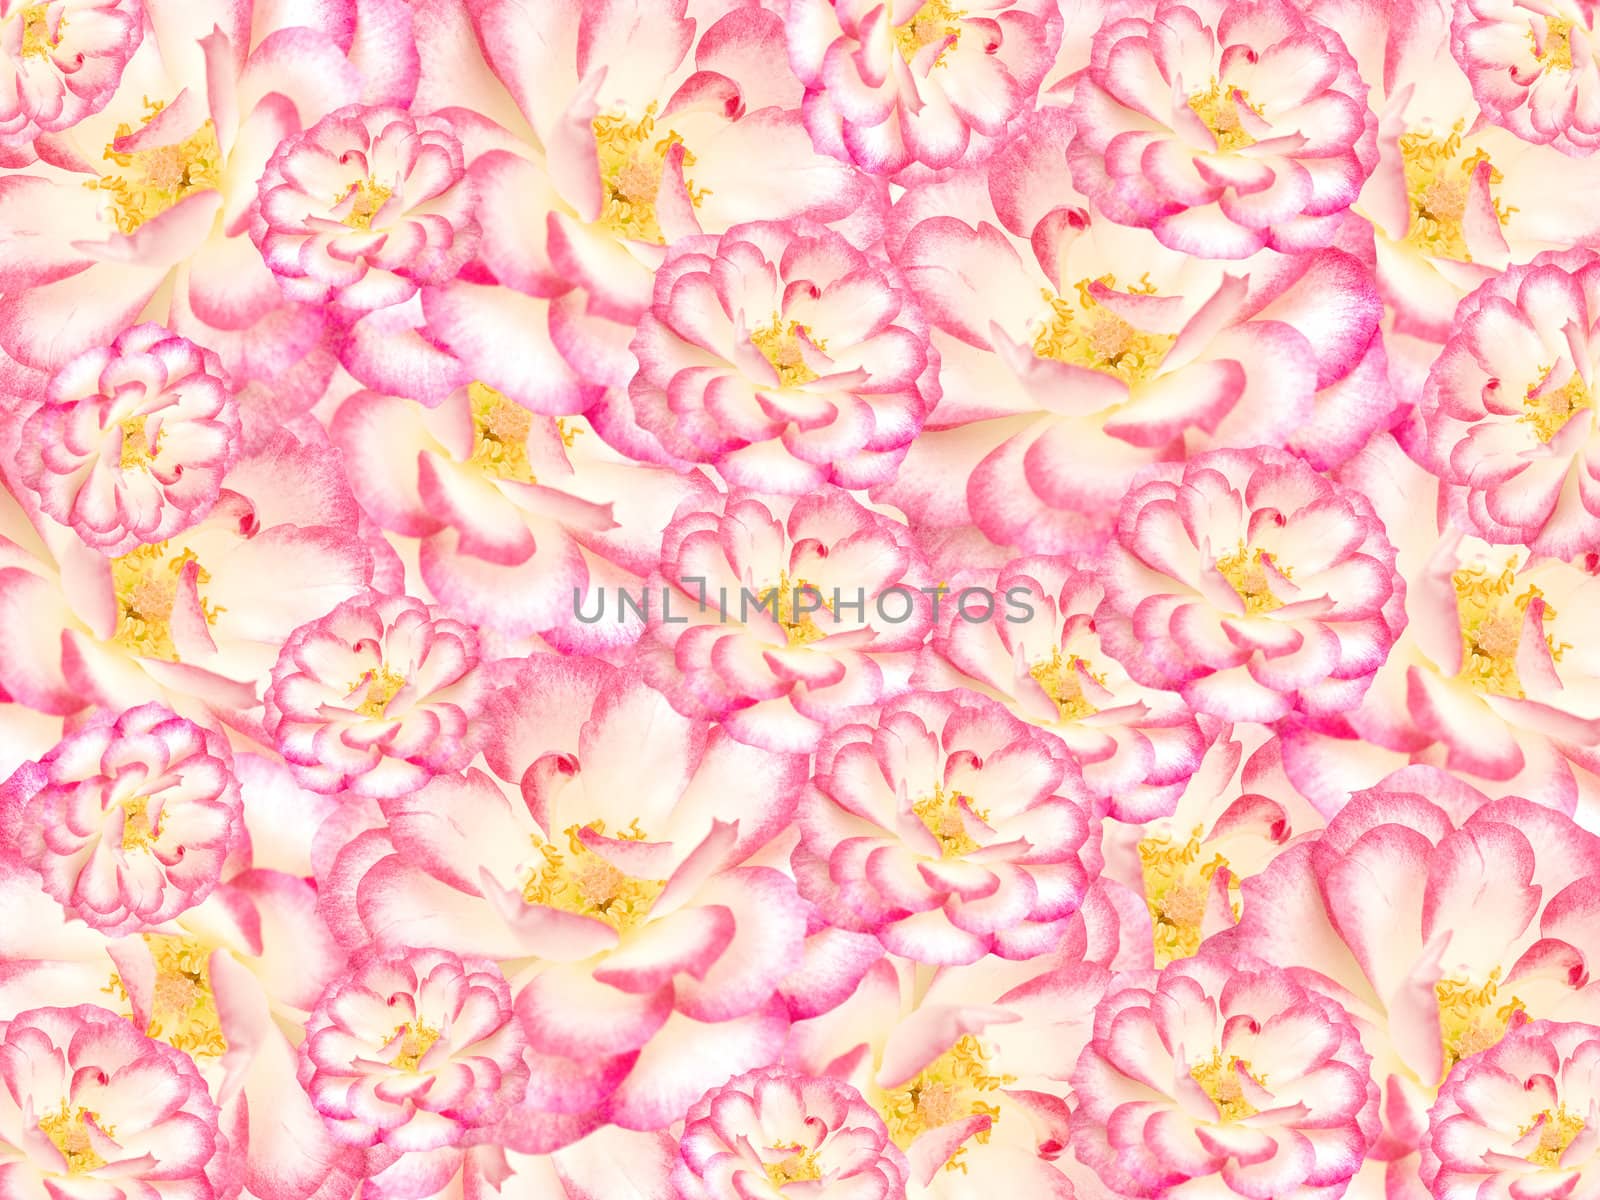 floral flower textured background, pink white and yellow by sherj